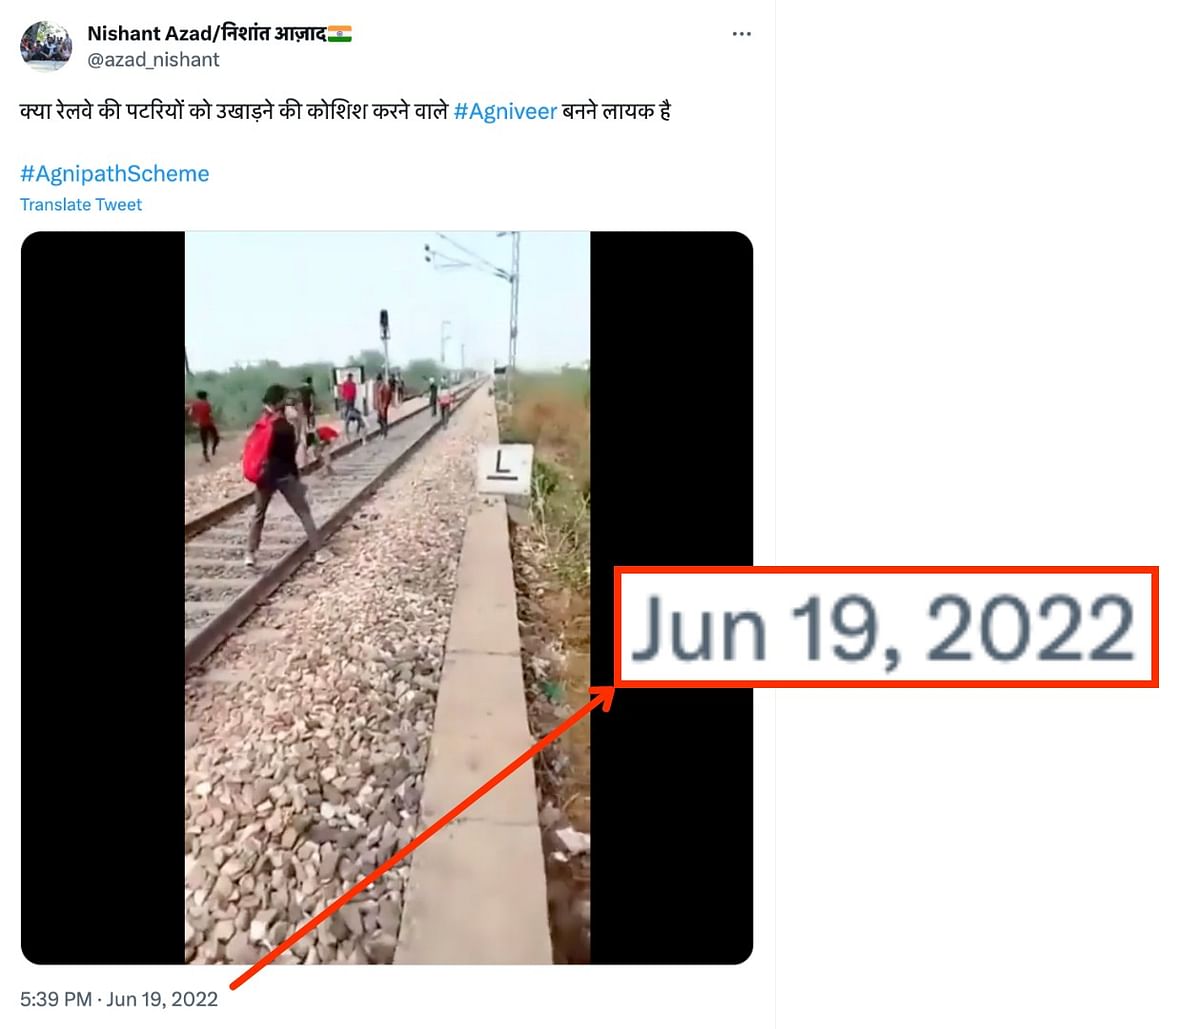 The video dates back to June 2022 and reportedly shows an Agnipath scheme protest in Rajasthan's Bharatpur.